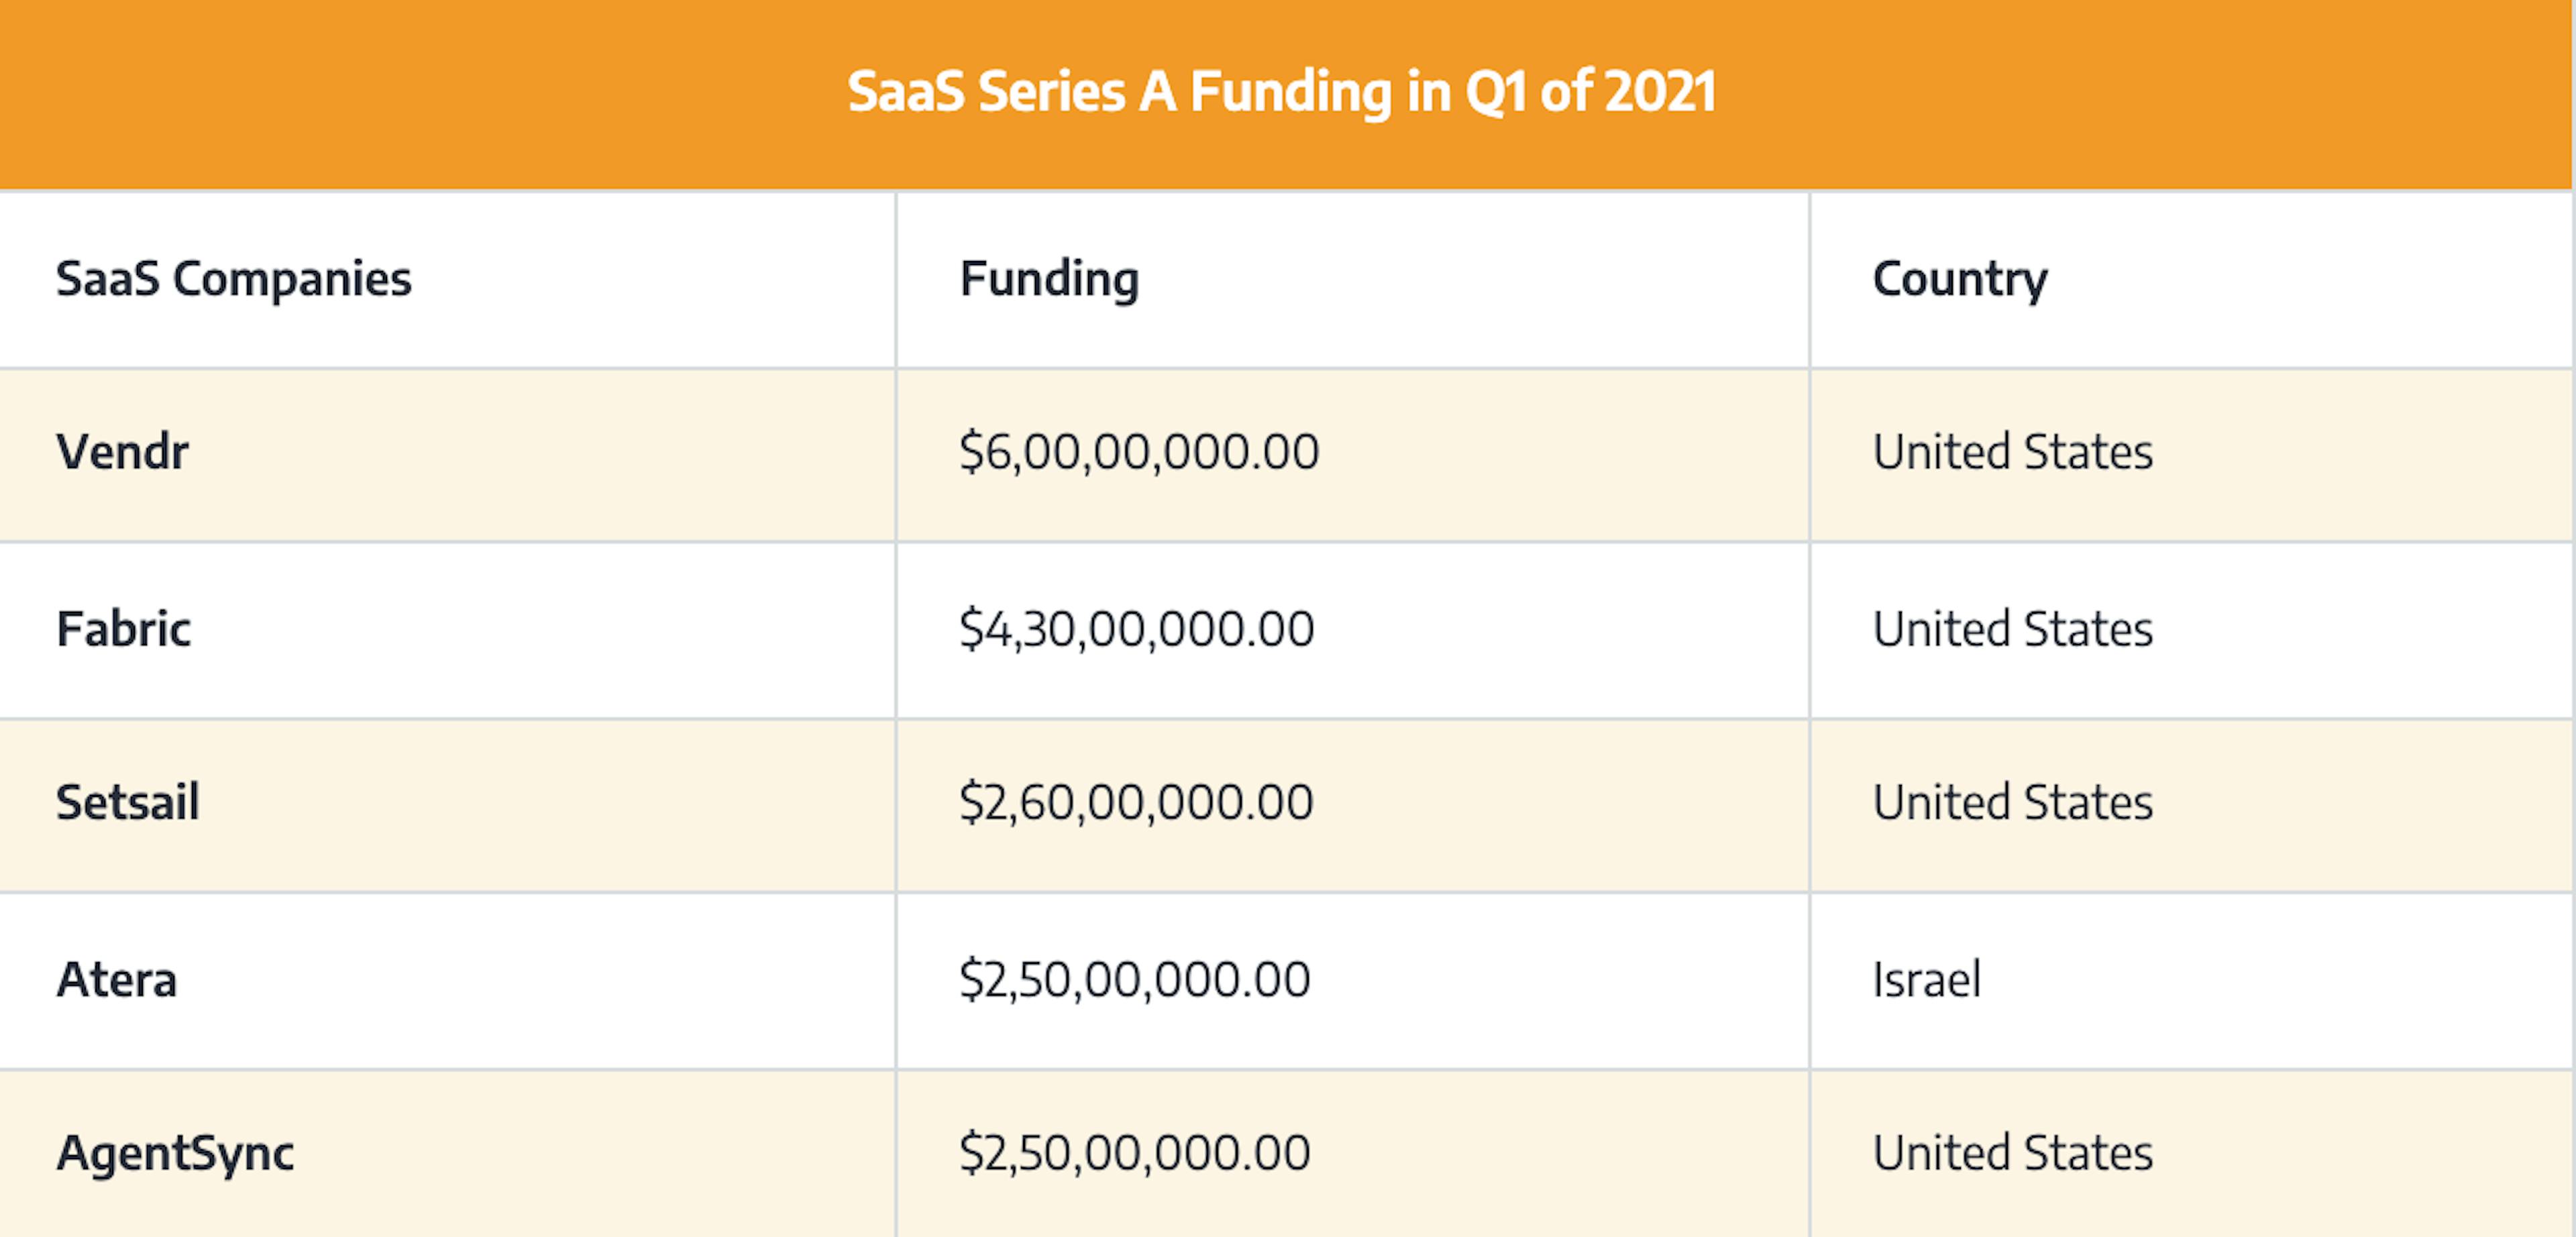 SaaS Series A Funding Amounts in Q1 of 2021